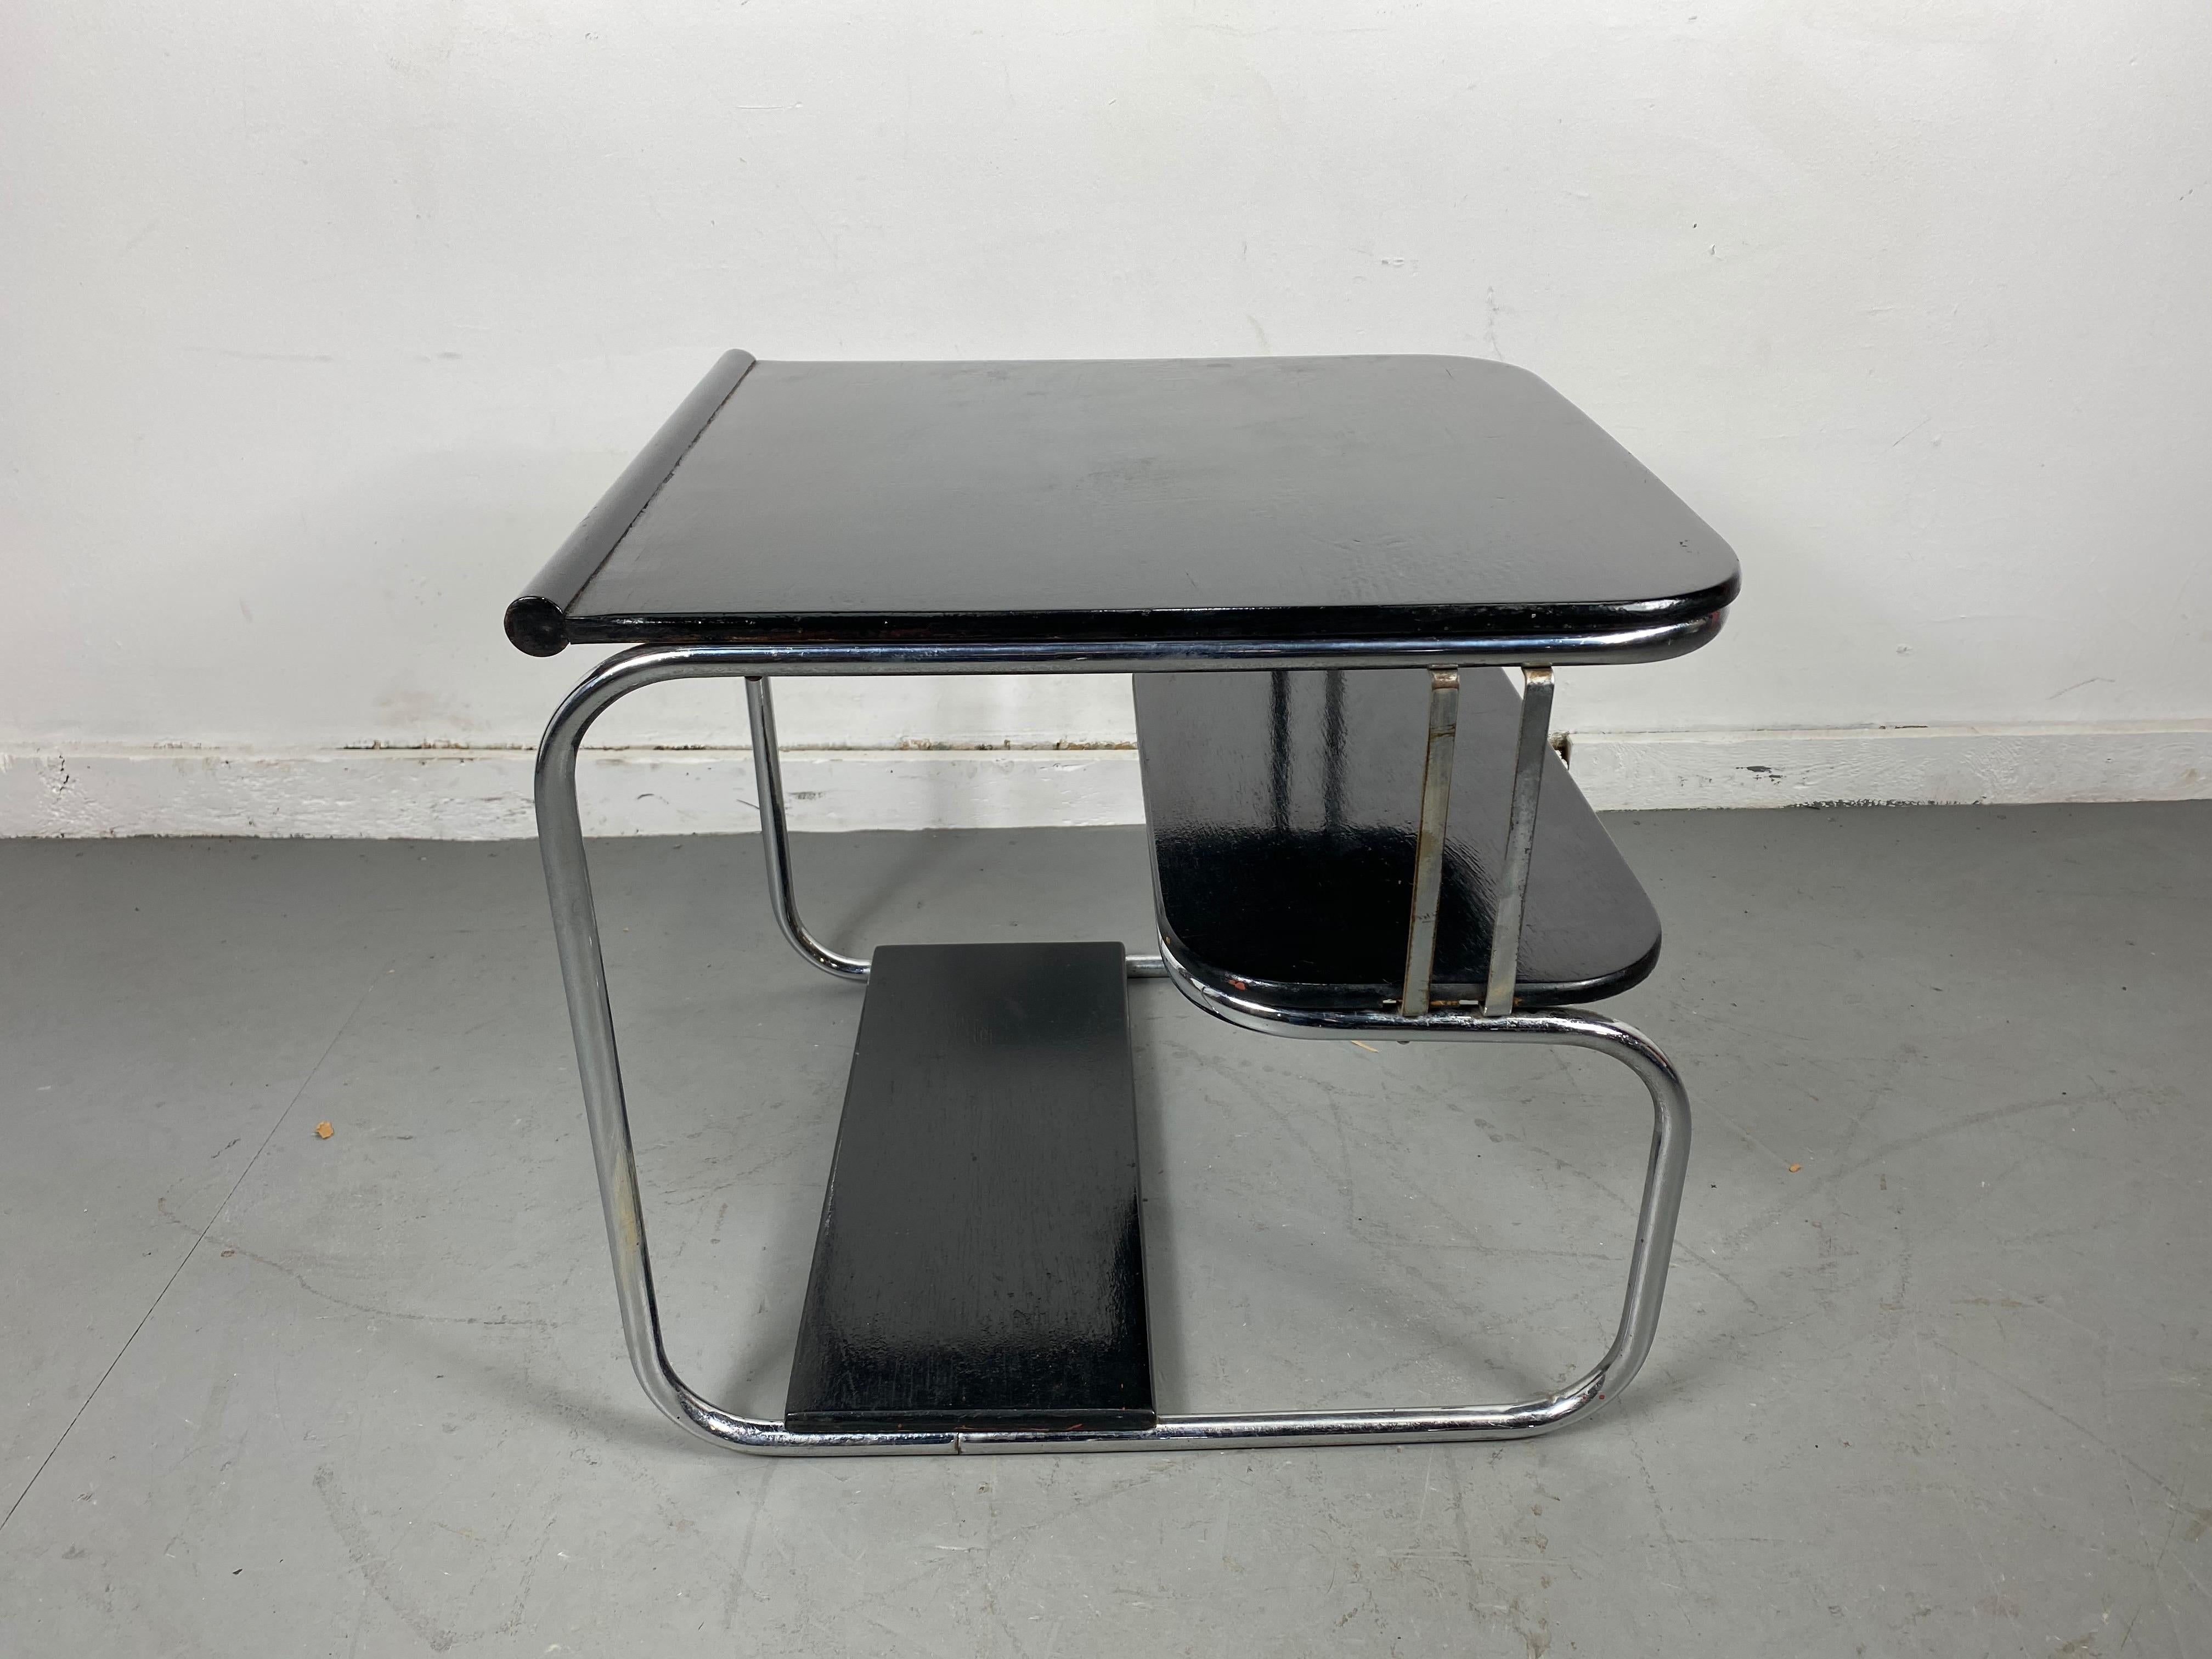 Rare 1930s Art Deco/Machine Age, streamline black and chrome table, KEM Weber, have never seen in person, only in 1930s KEM Weber catalog, stunning, unusual design.